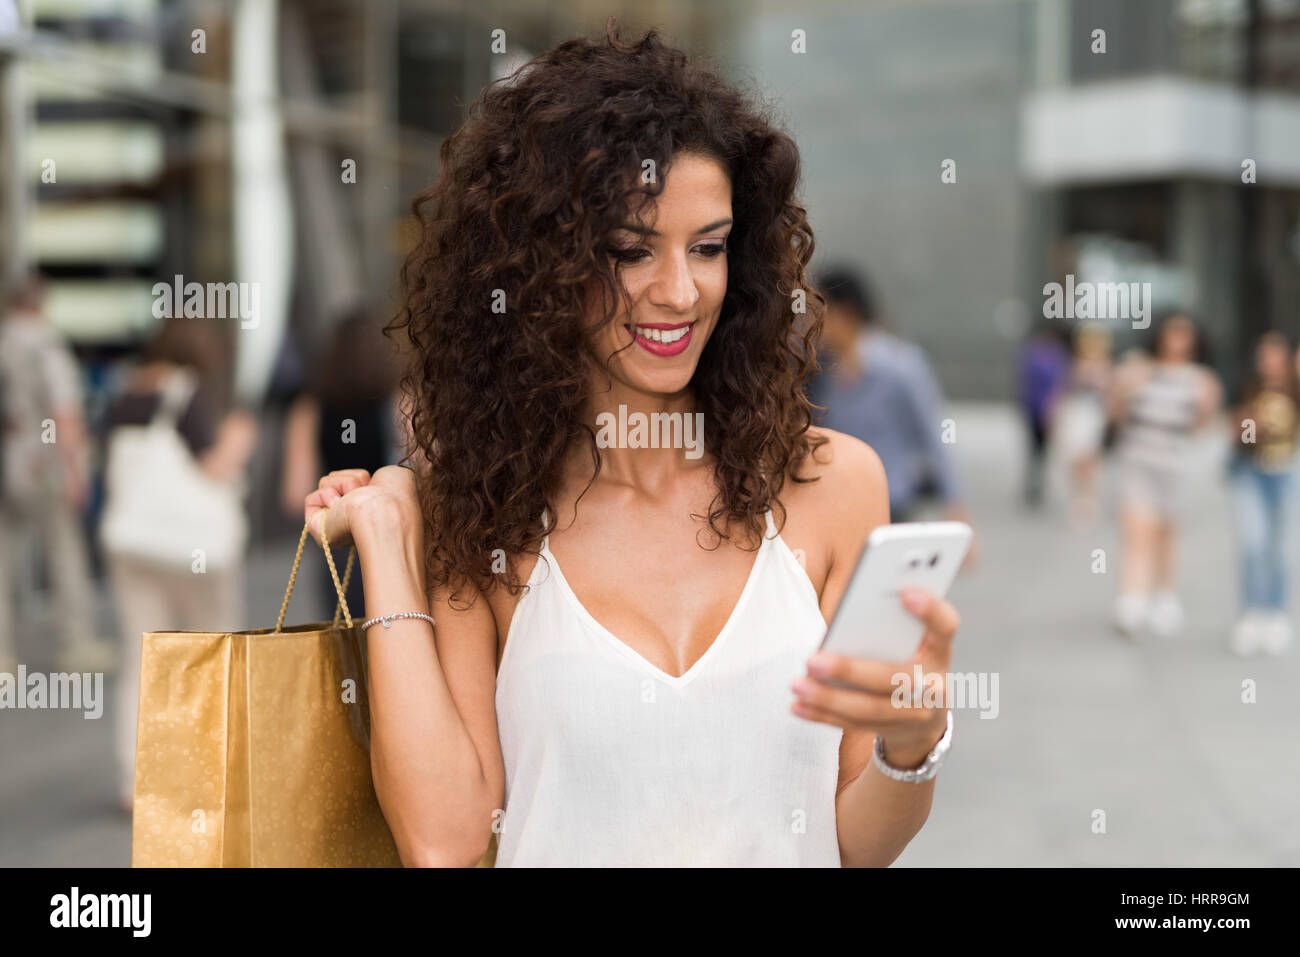 Smiling woman holding shopping bags while using her mobile phone Stock Photo